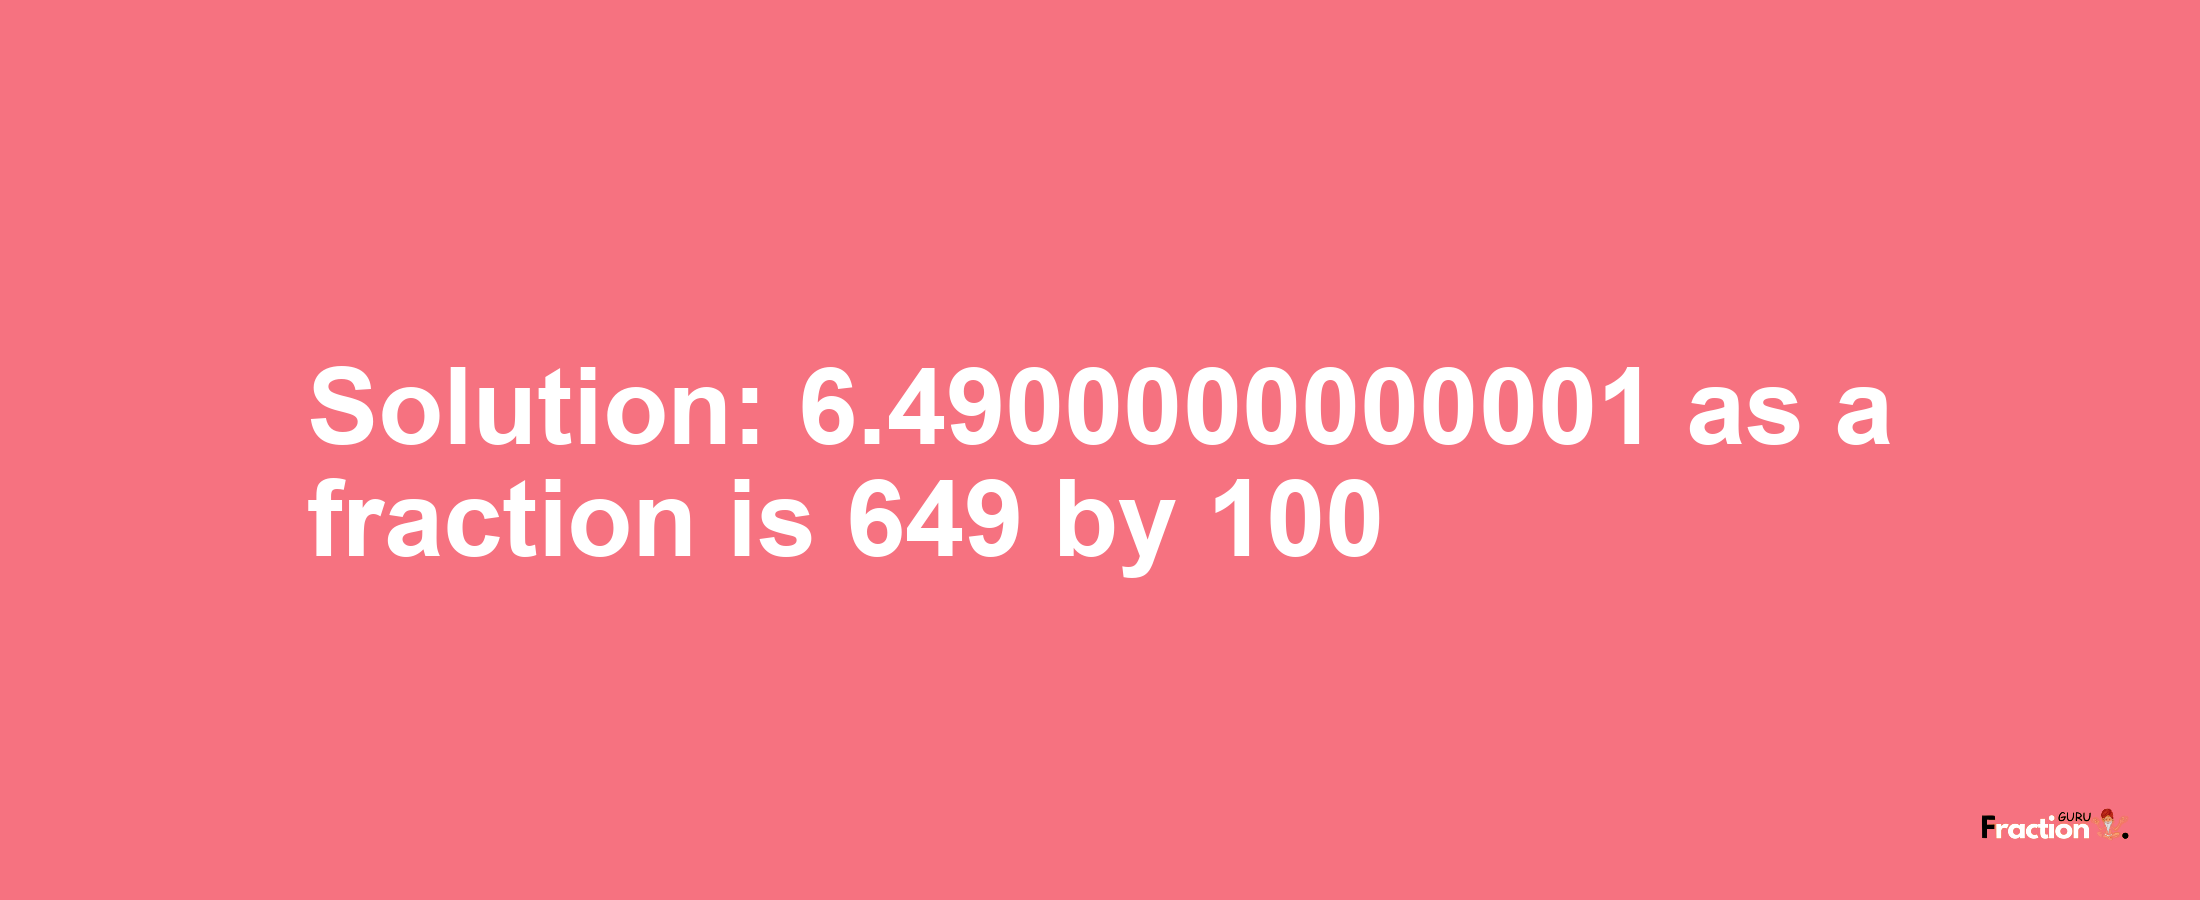 Solution:6.4900000000001 as a fraction is 649/100